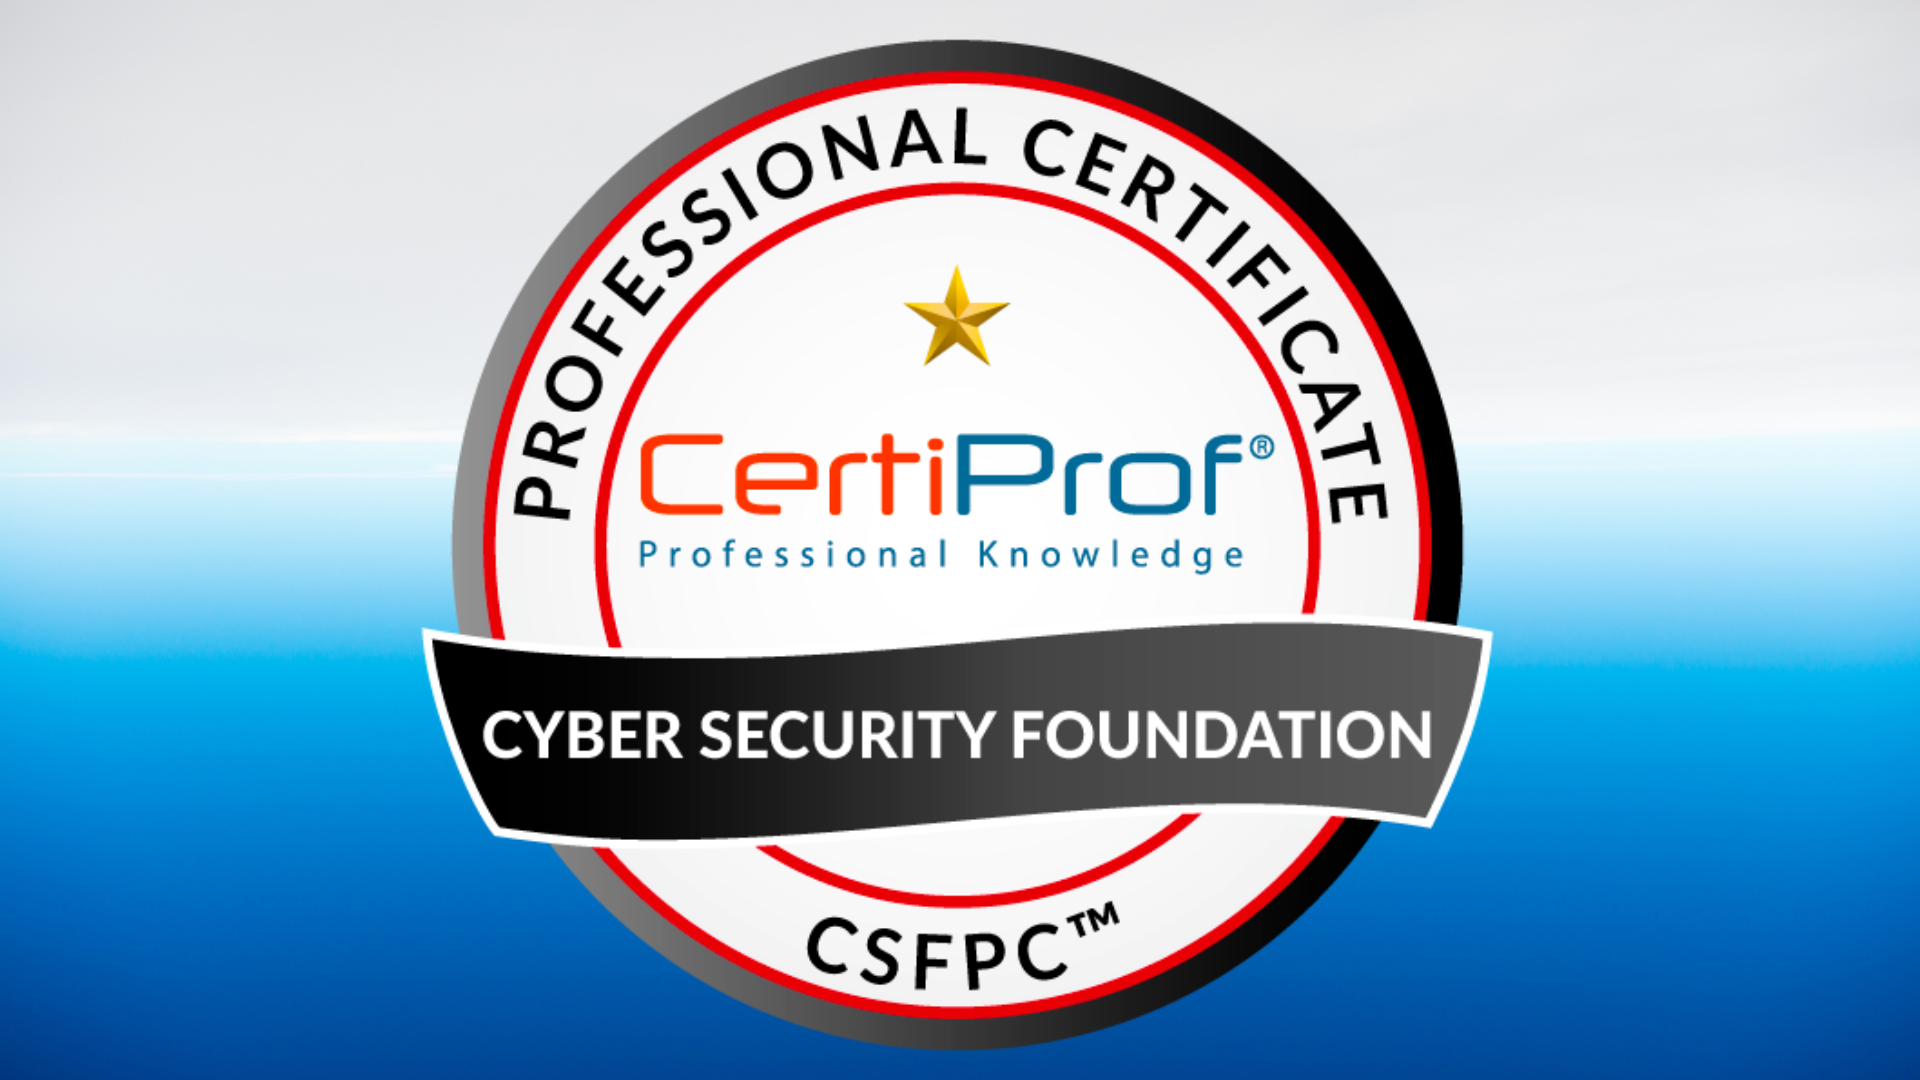 Cyber Security Foundation - CSFPC™